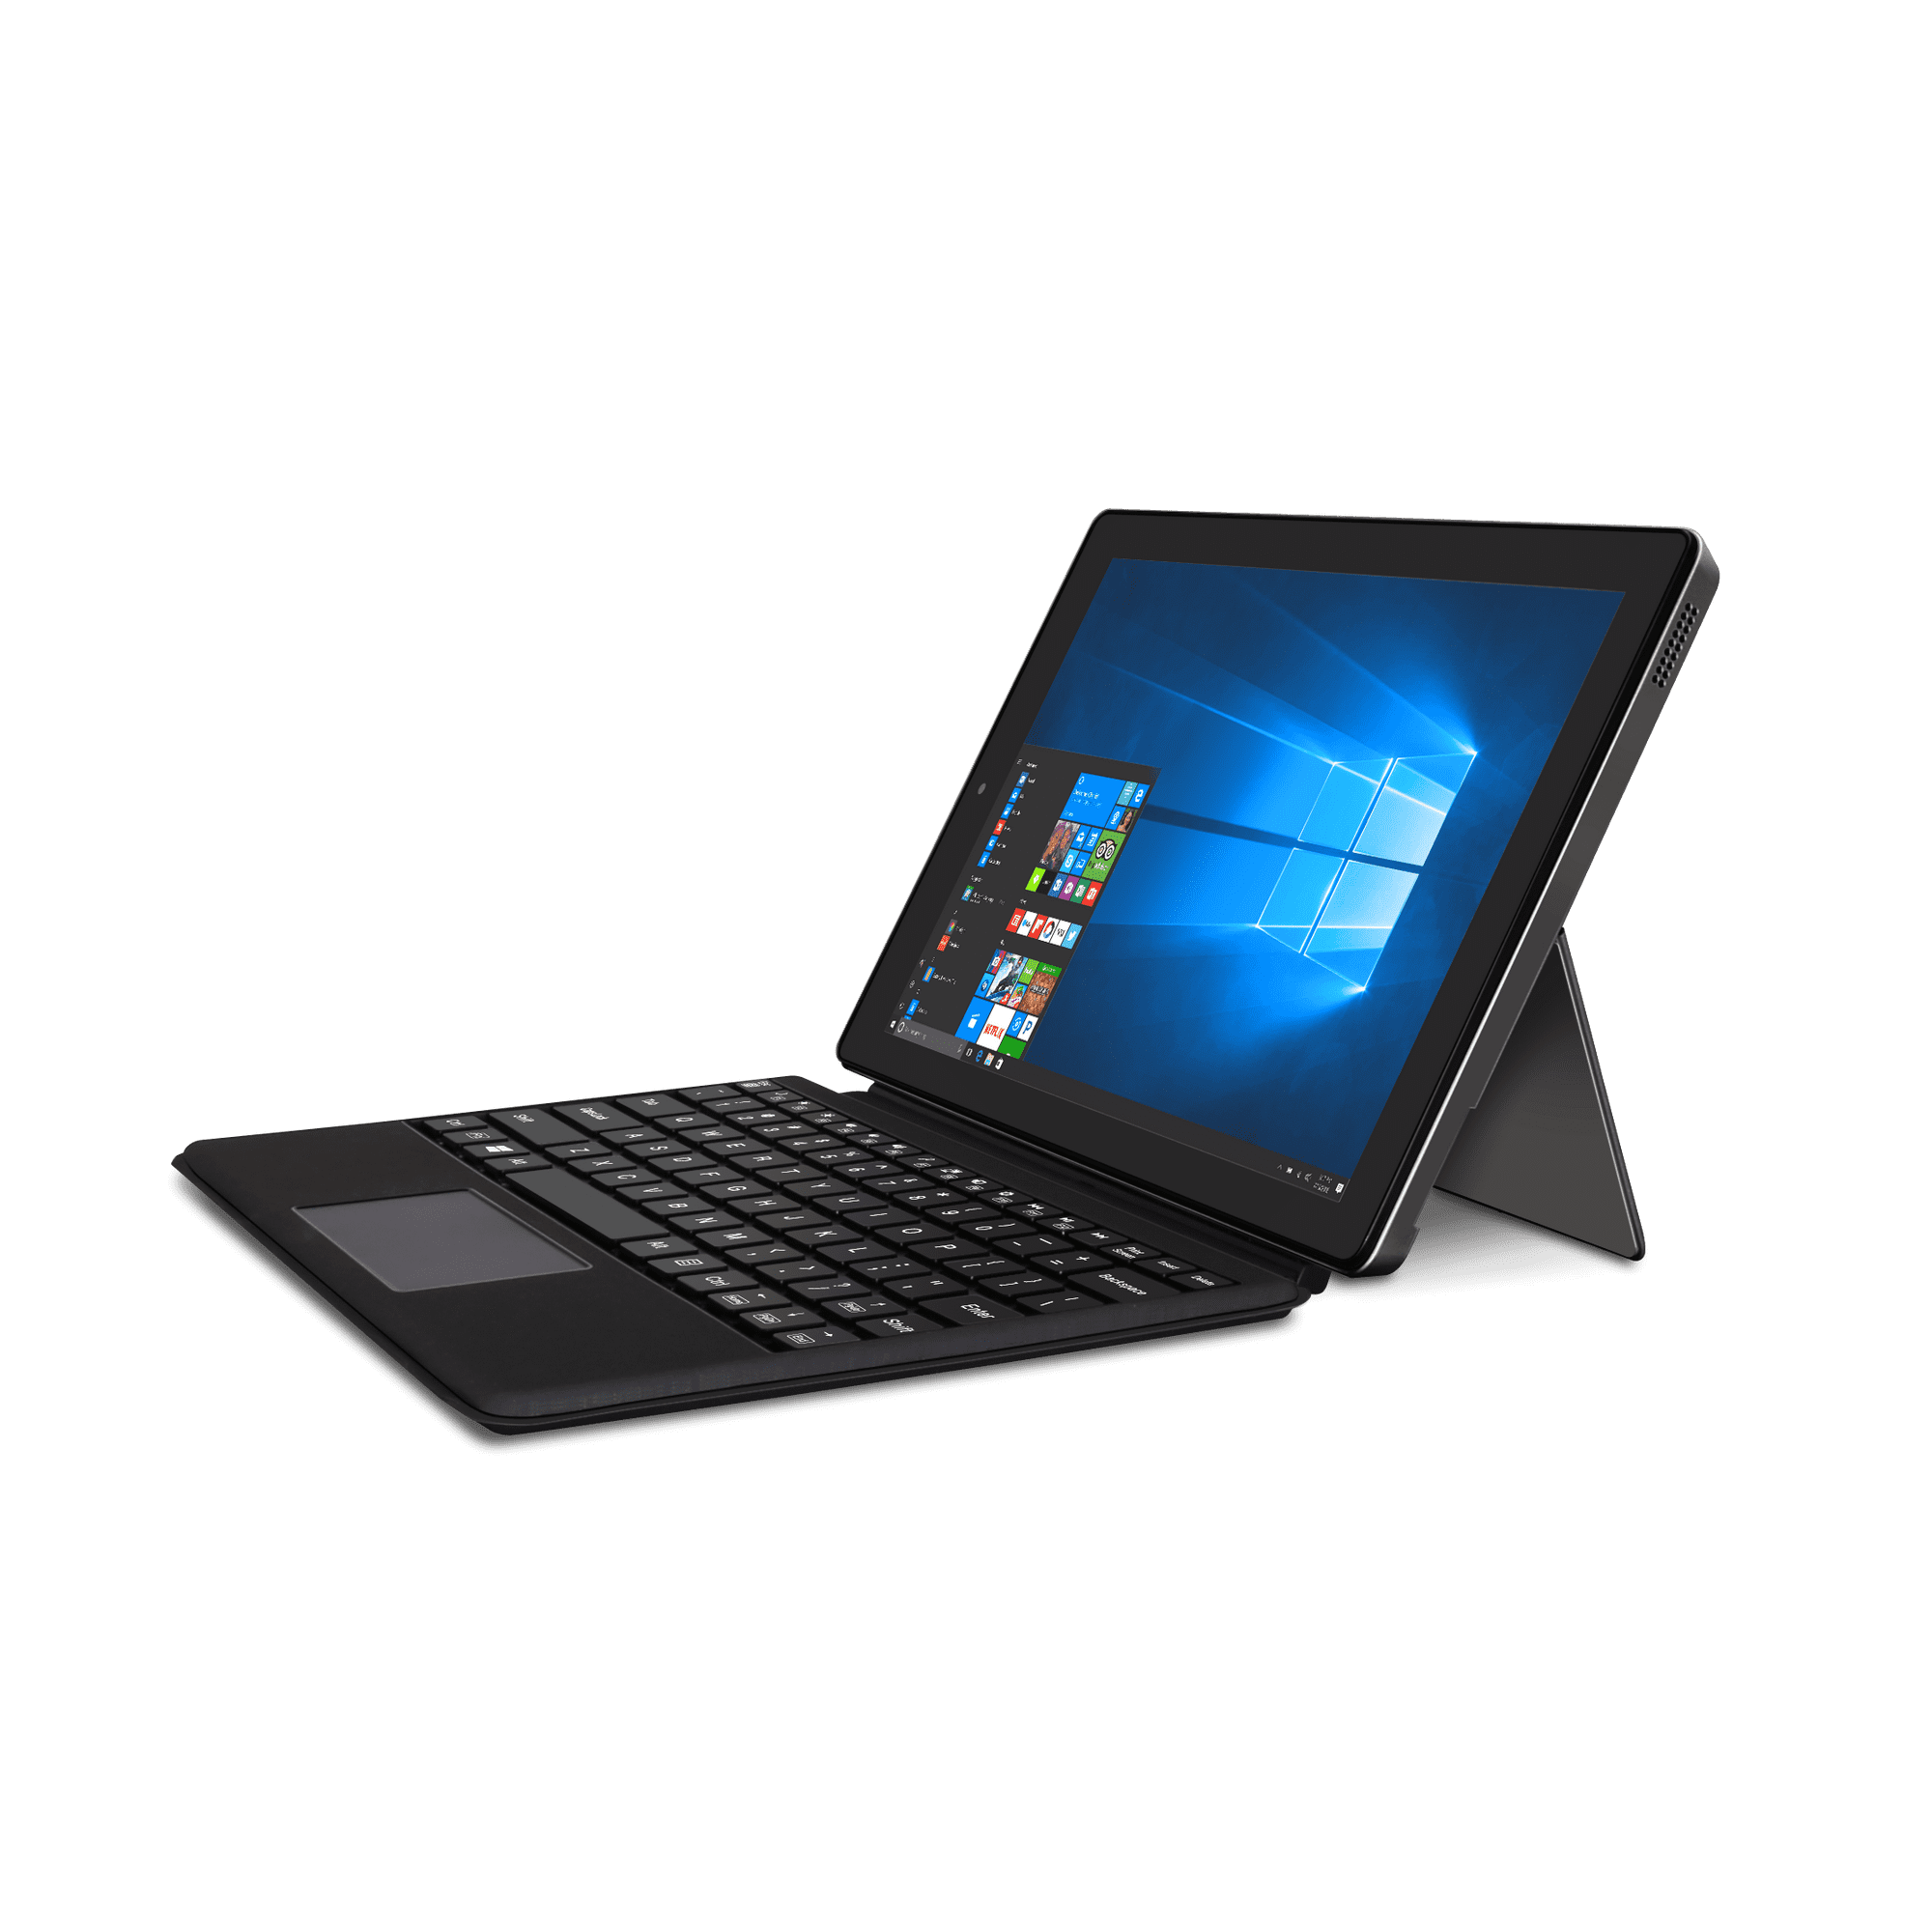 Rca Cambio 10 1 2 In 1 Windows Tablet Keyboard Charcoal